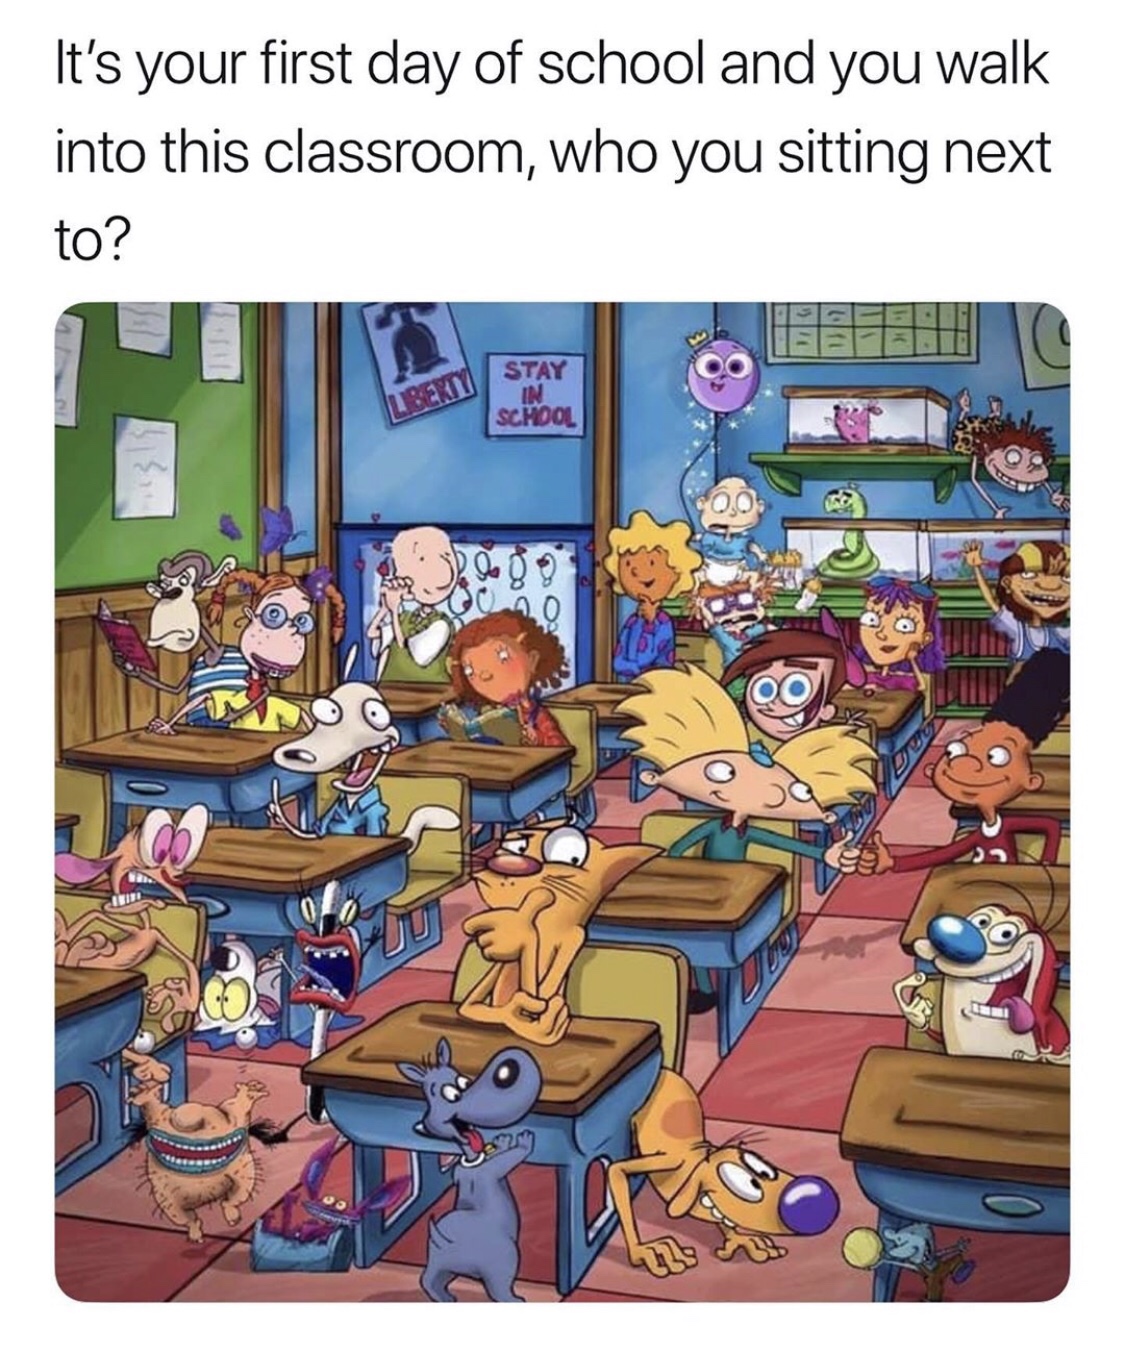 CatDog - It's your first day of school and you walk into this classroom, who you sitting next to?